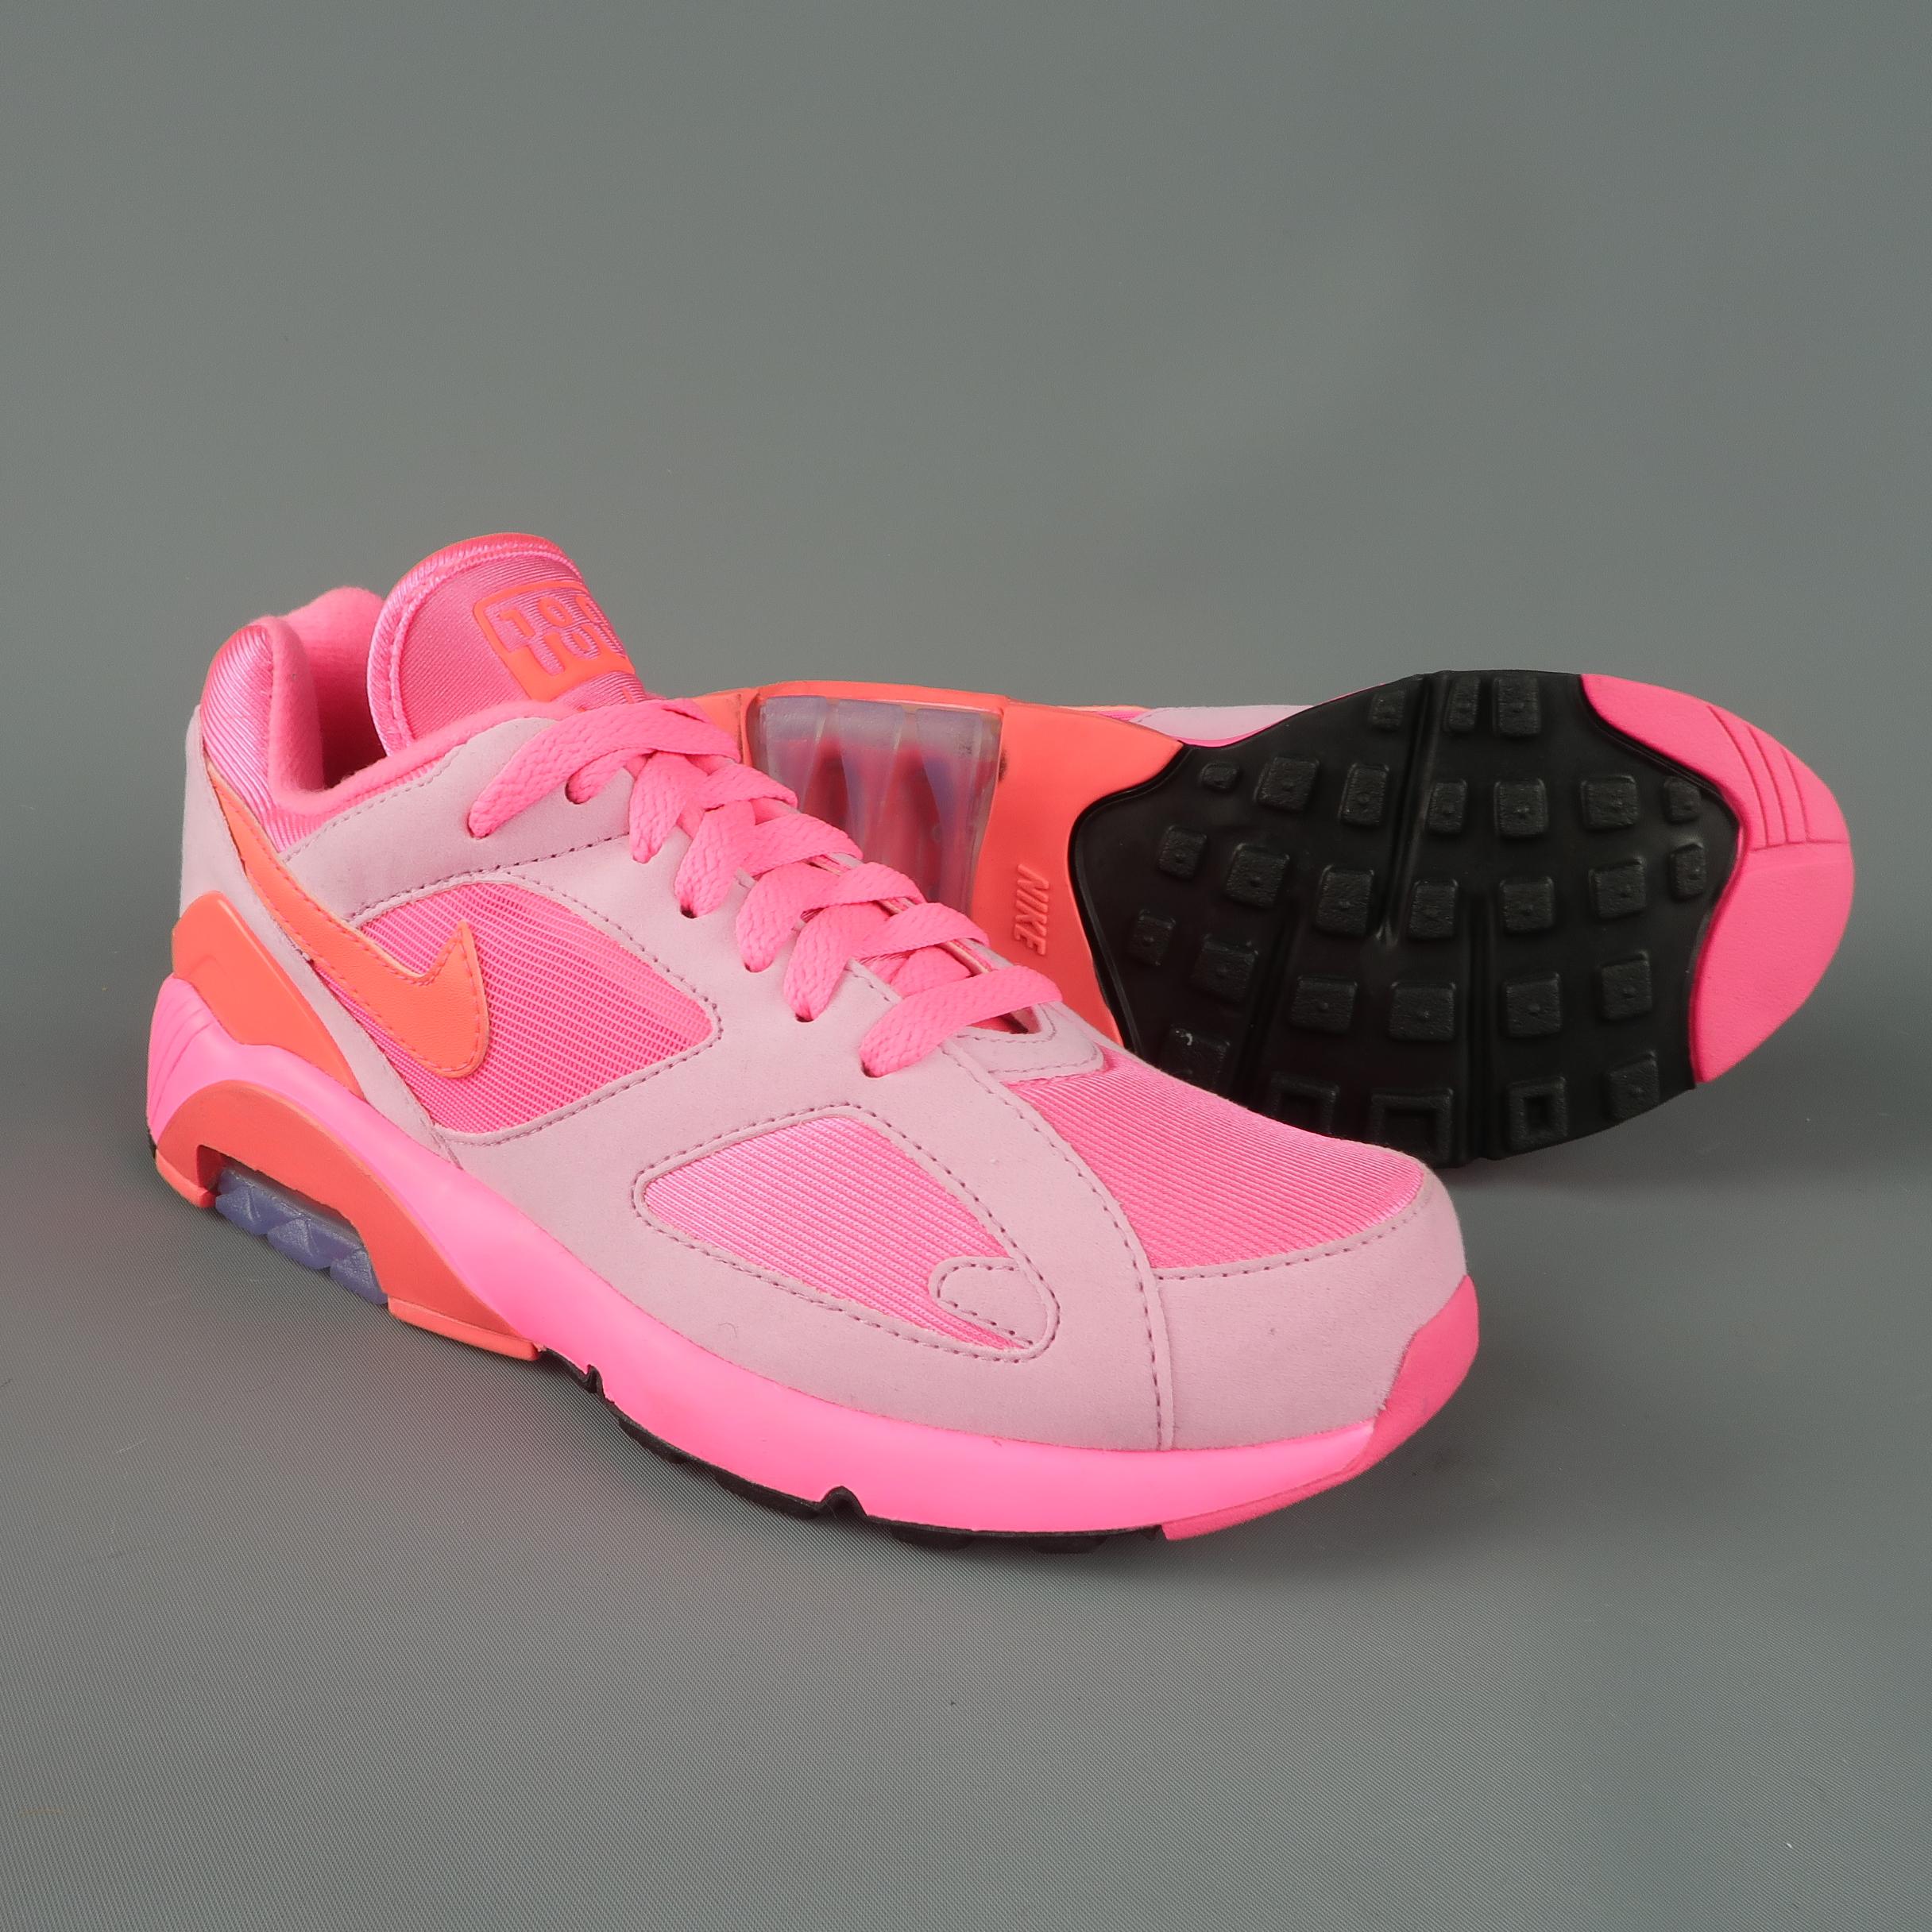 neon pink airmax